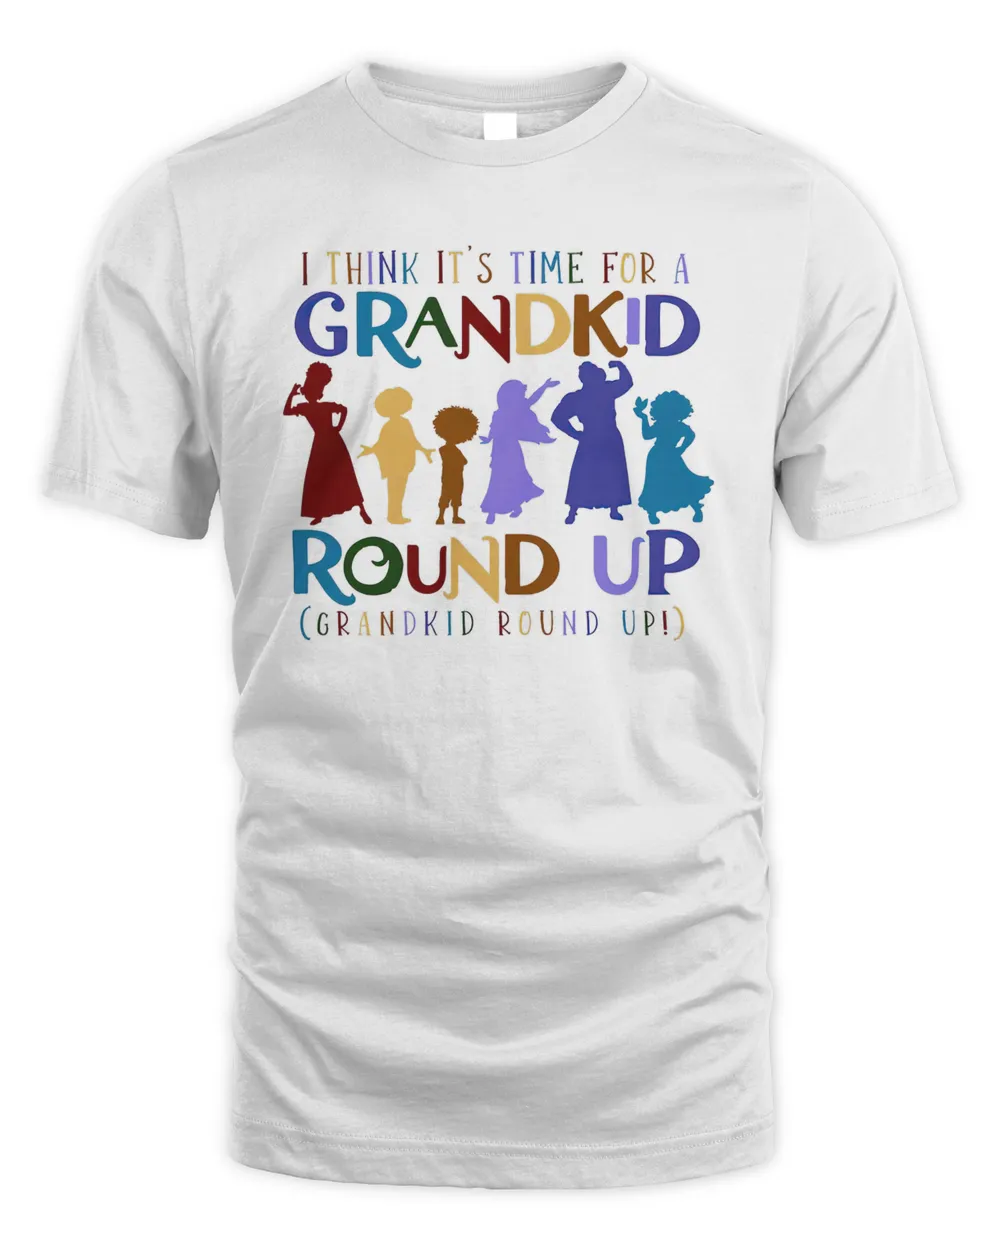 I think it's time for a Grandkid round up shirt